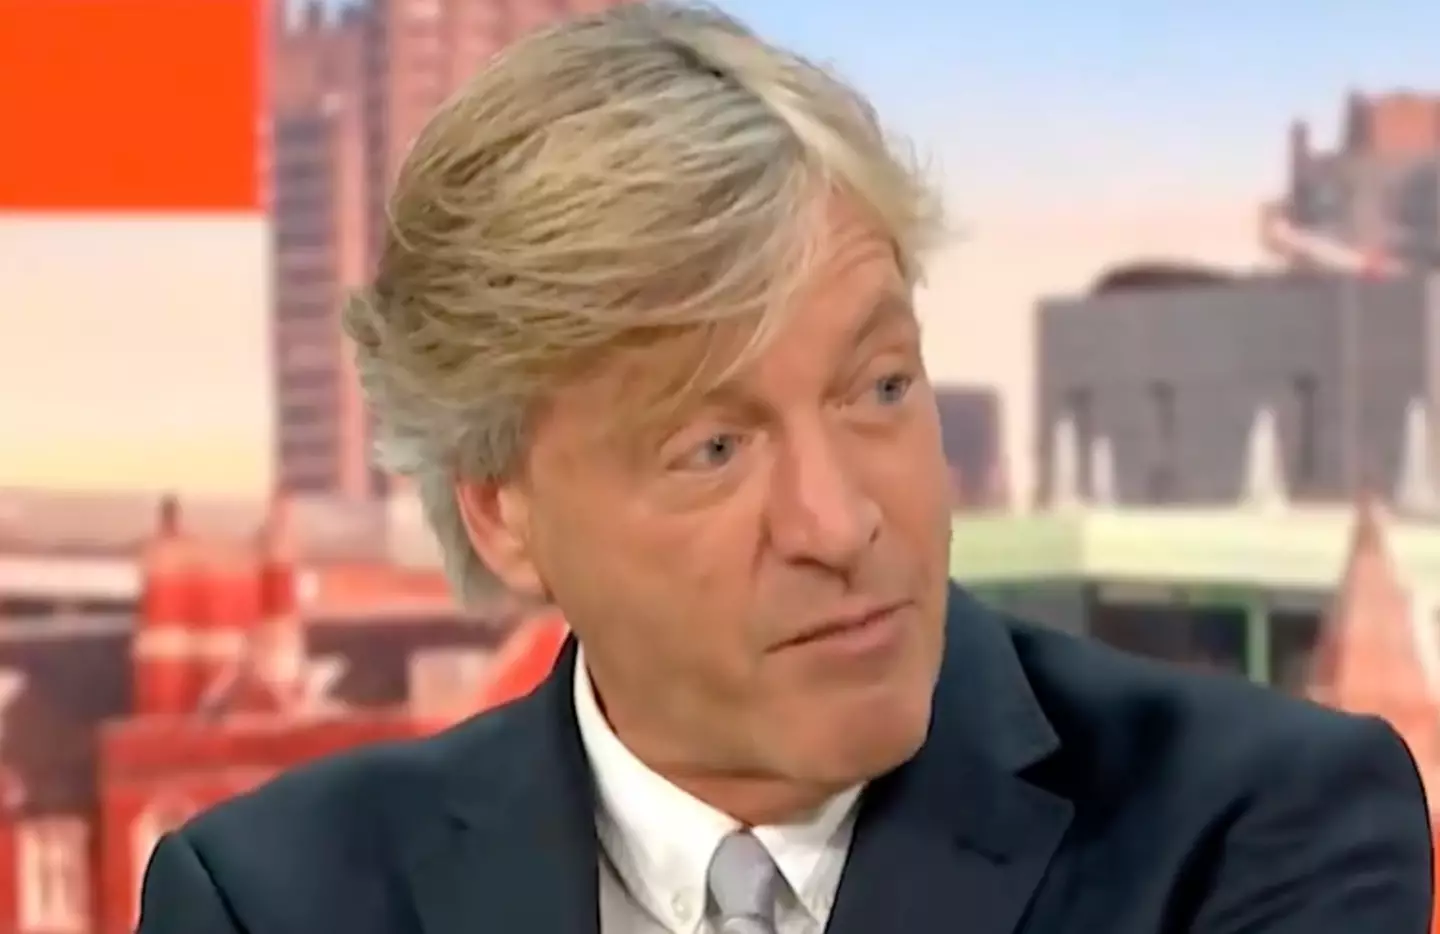 Richard Madeley has been presenting in his recognisable voice for decades.